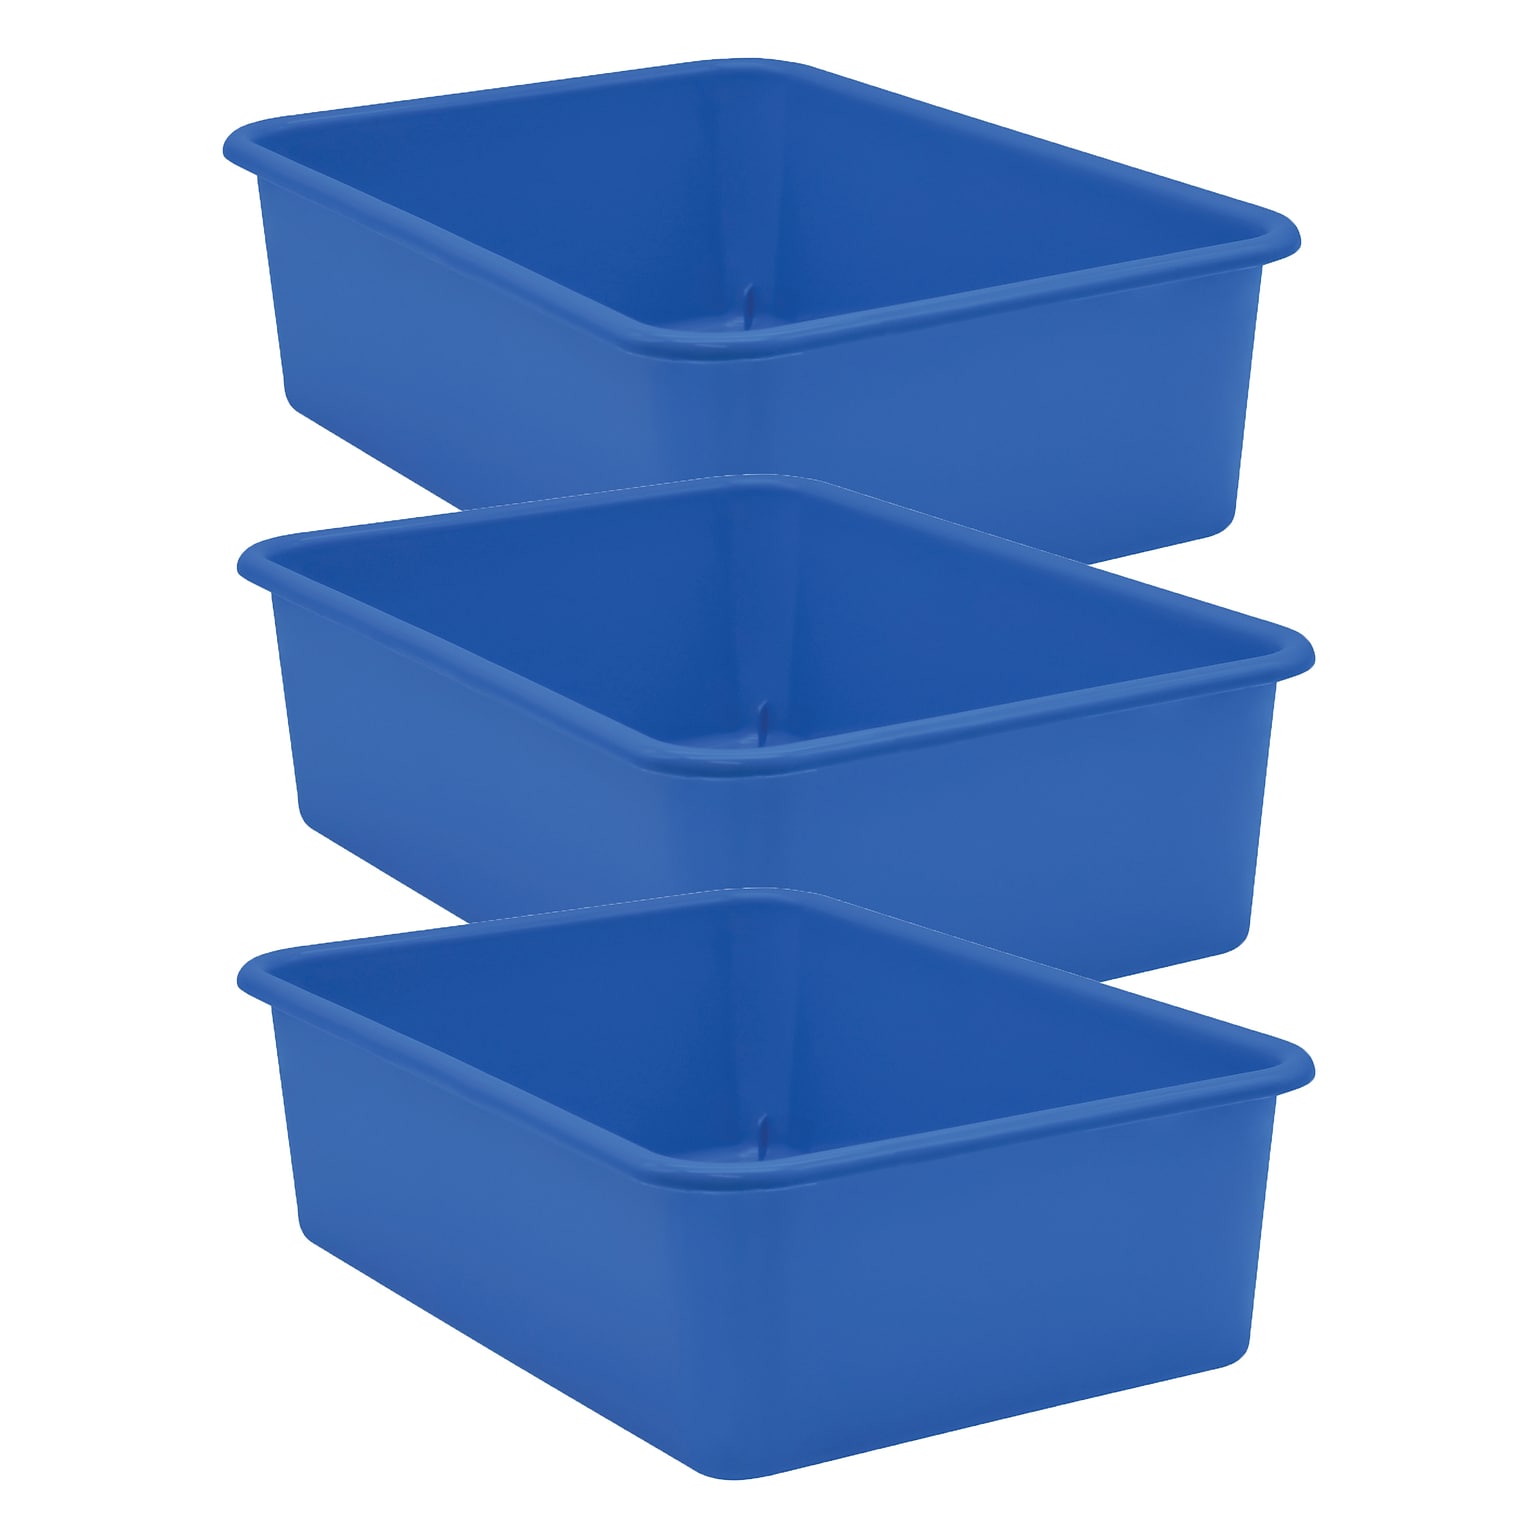 Teacher Created Resources® Plastic Storage Bin, Large, 16.25 x 11.5 x 5, Blue, Pack of 3 (TCR20411-3)